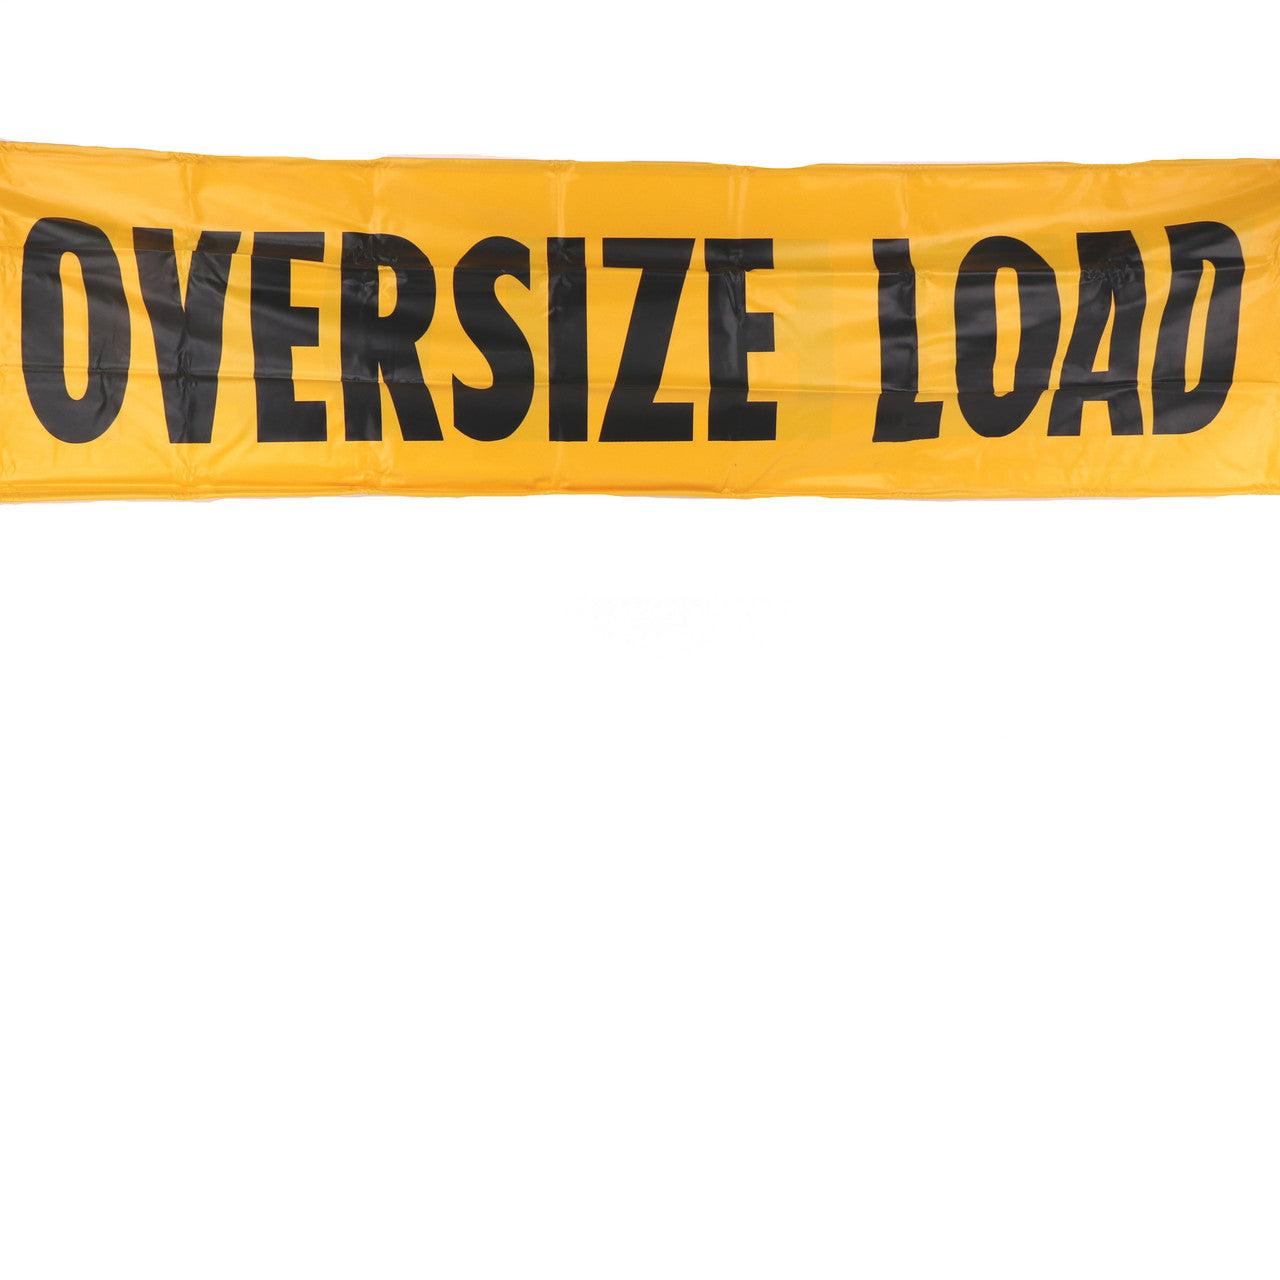 Kinedyne 18" by 84" Reversible "Wide Load" and "Oversize Load" Banner